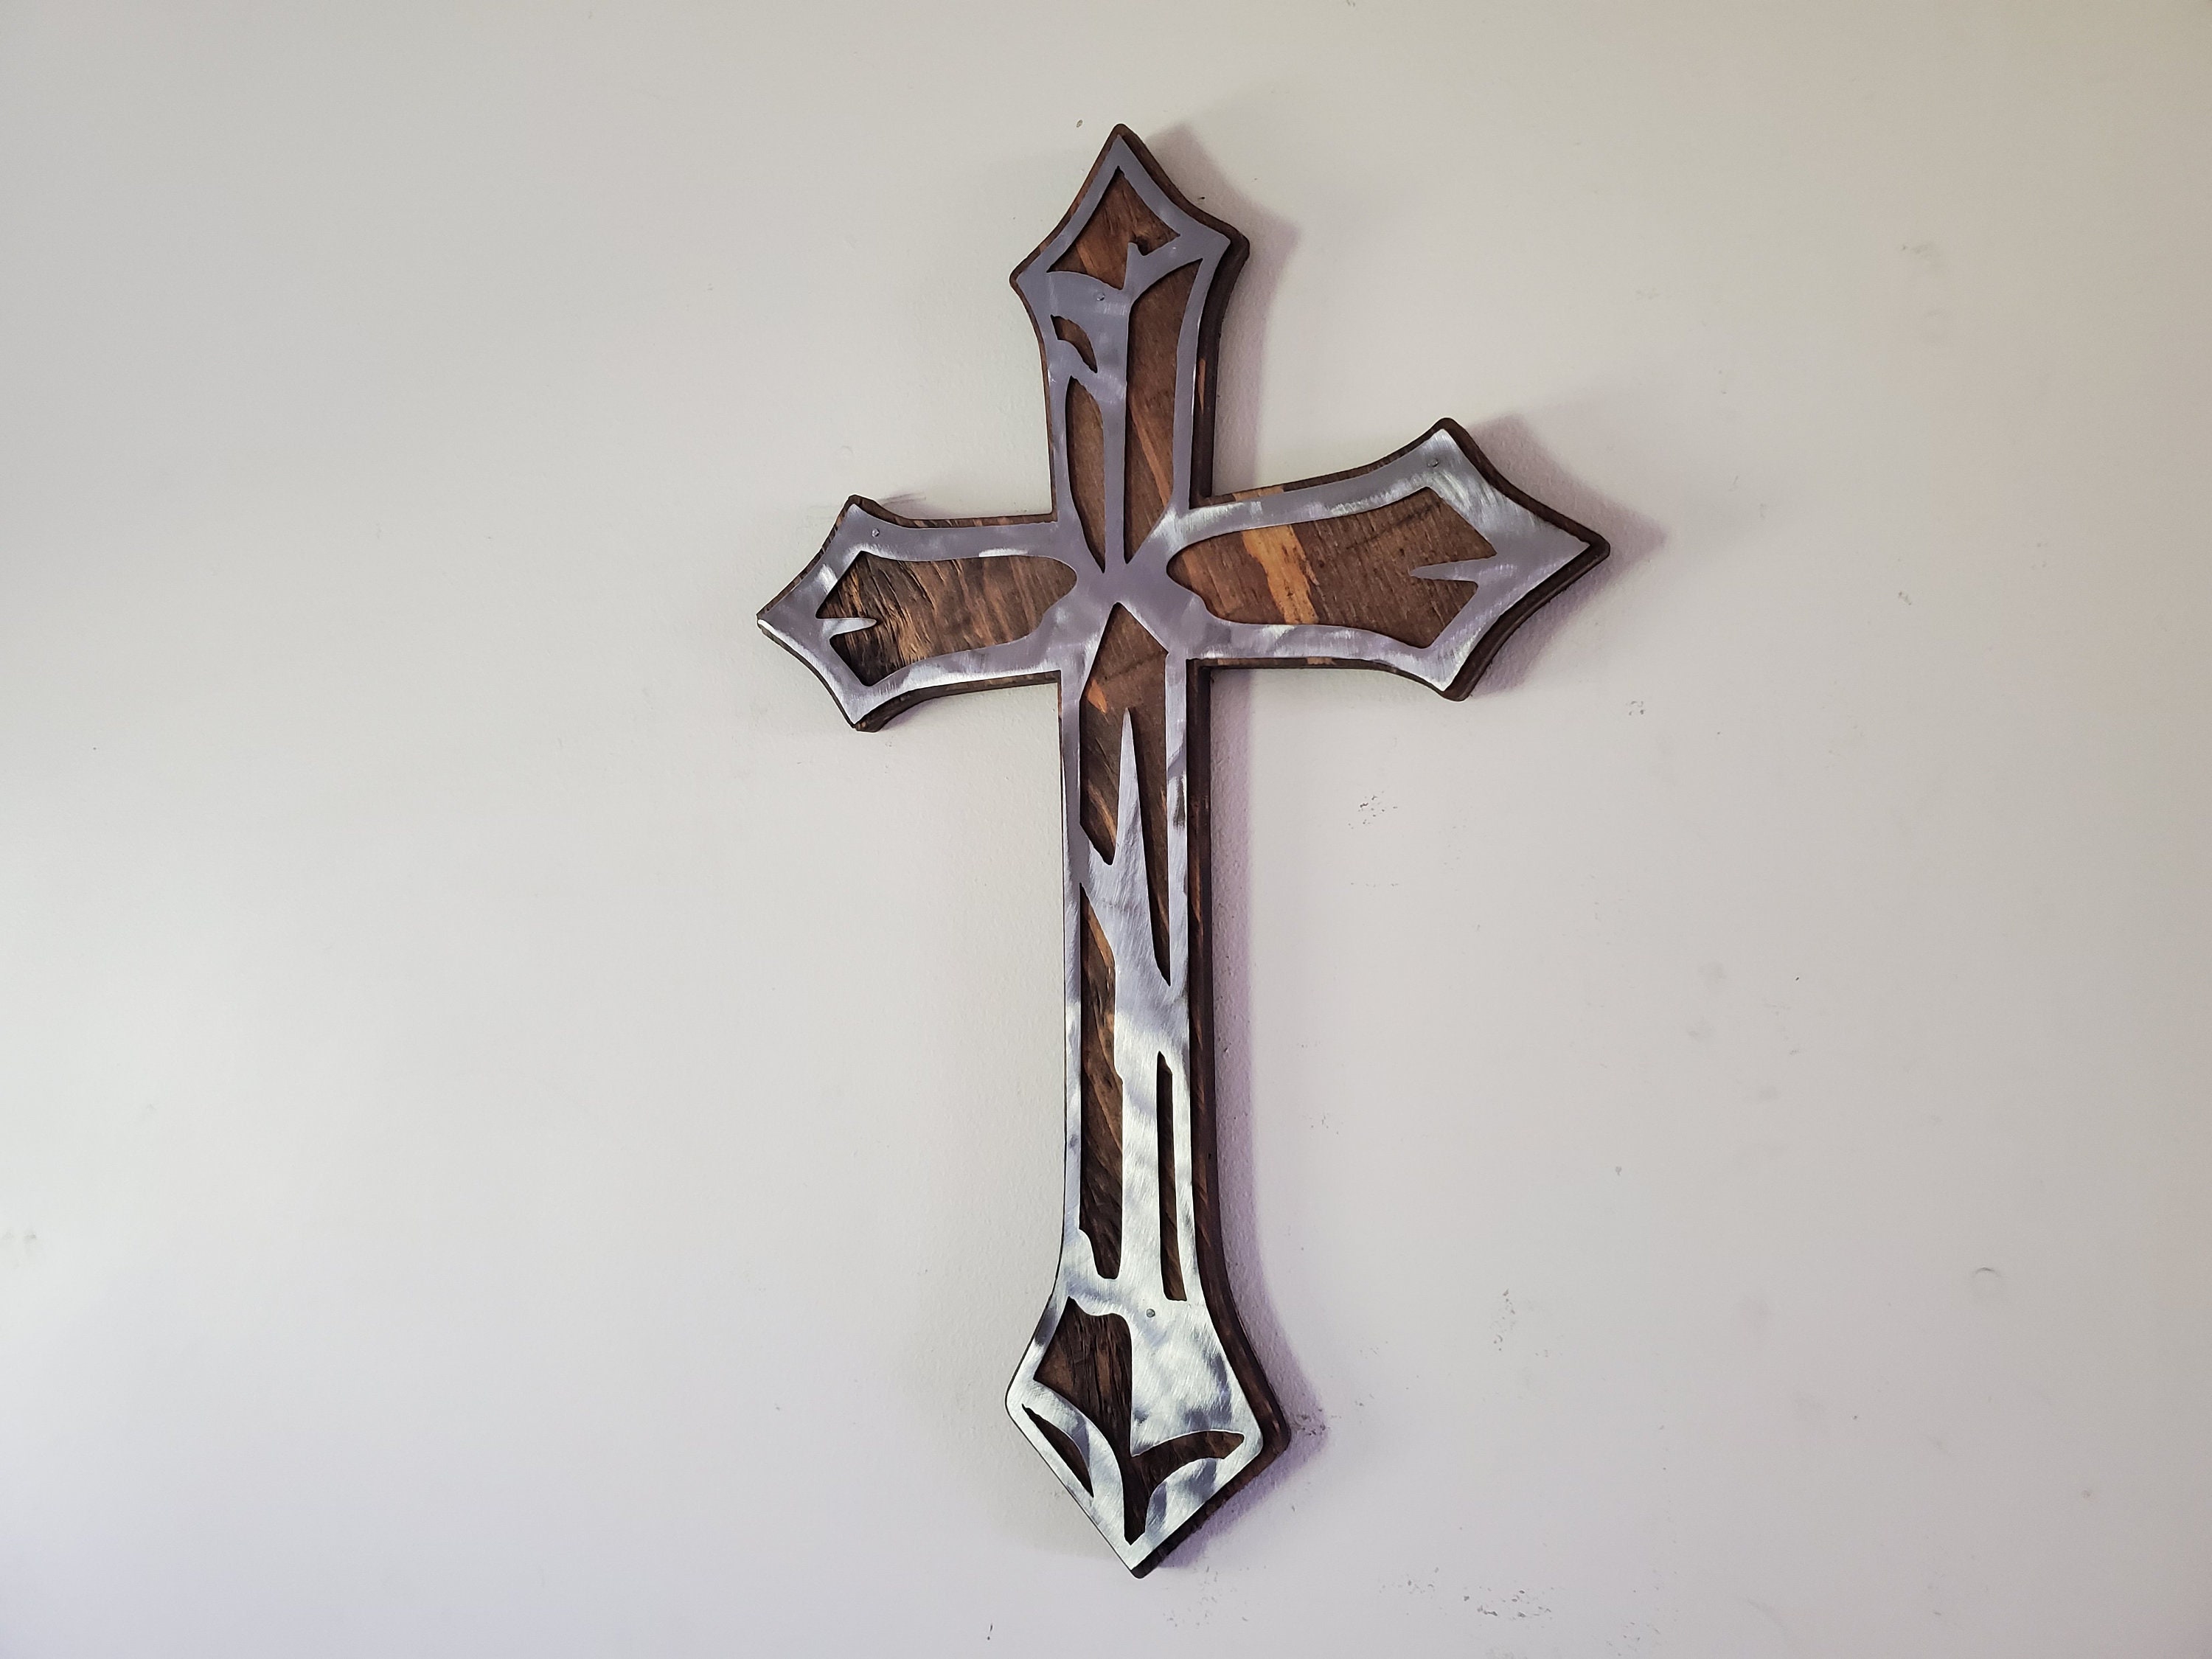 Rustic Distressed Metal Wood Cross Wall Art Sculpture Butterfly Decor Home Gift 